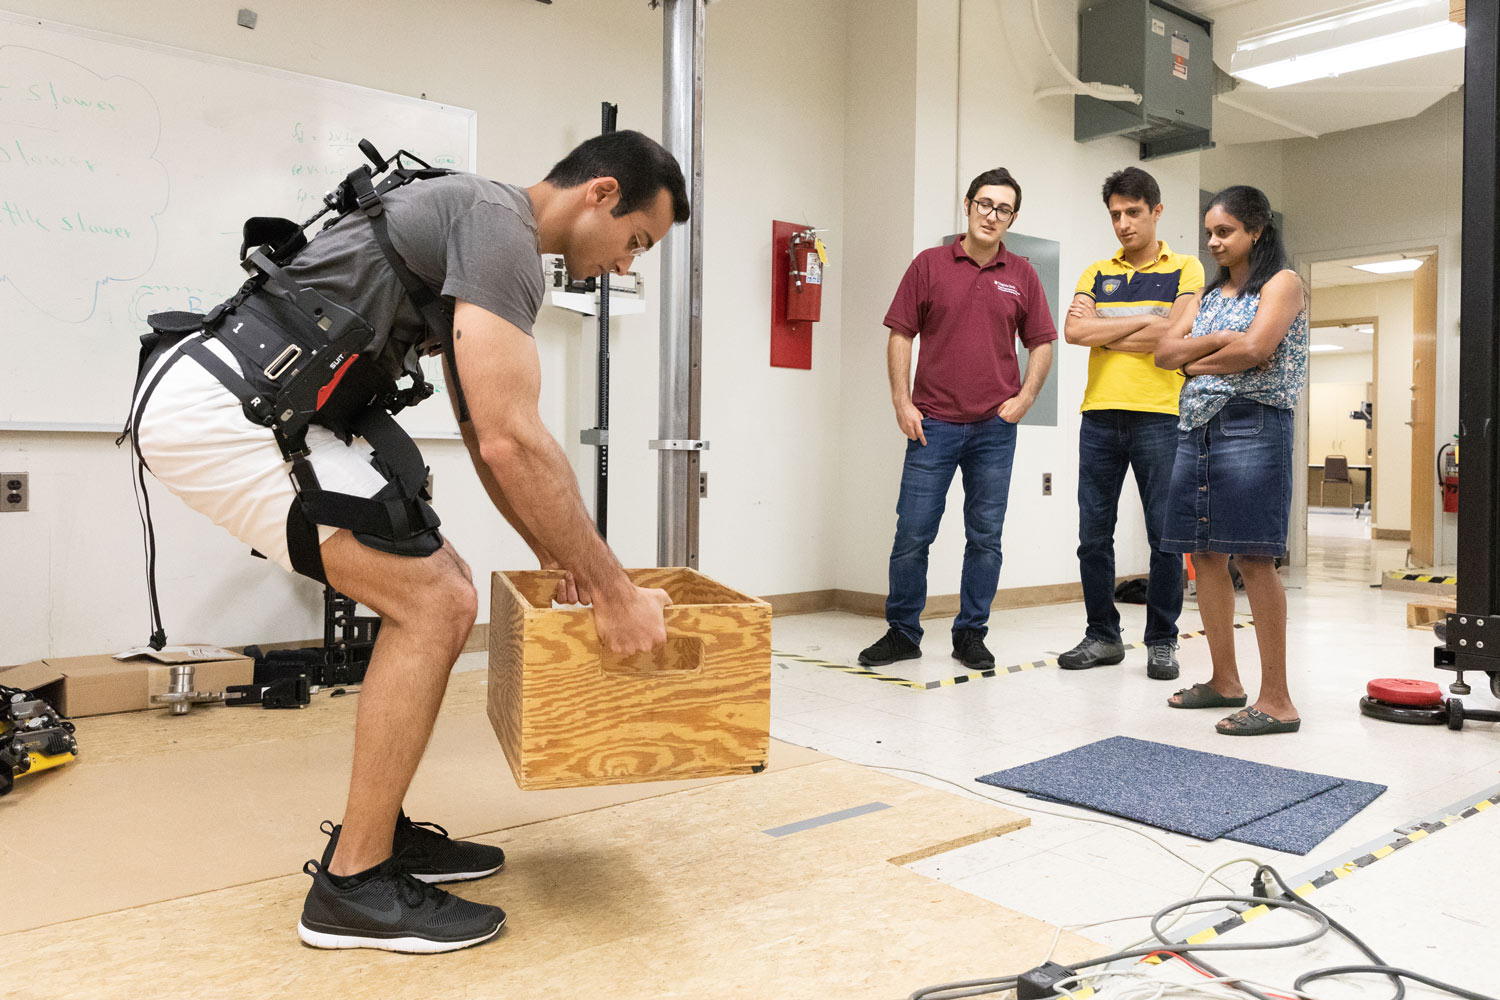 A group stands to the side and watches as a man wearing an exoskeleton lifts a wooden crate.